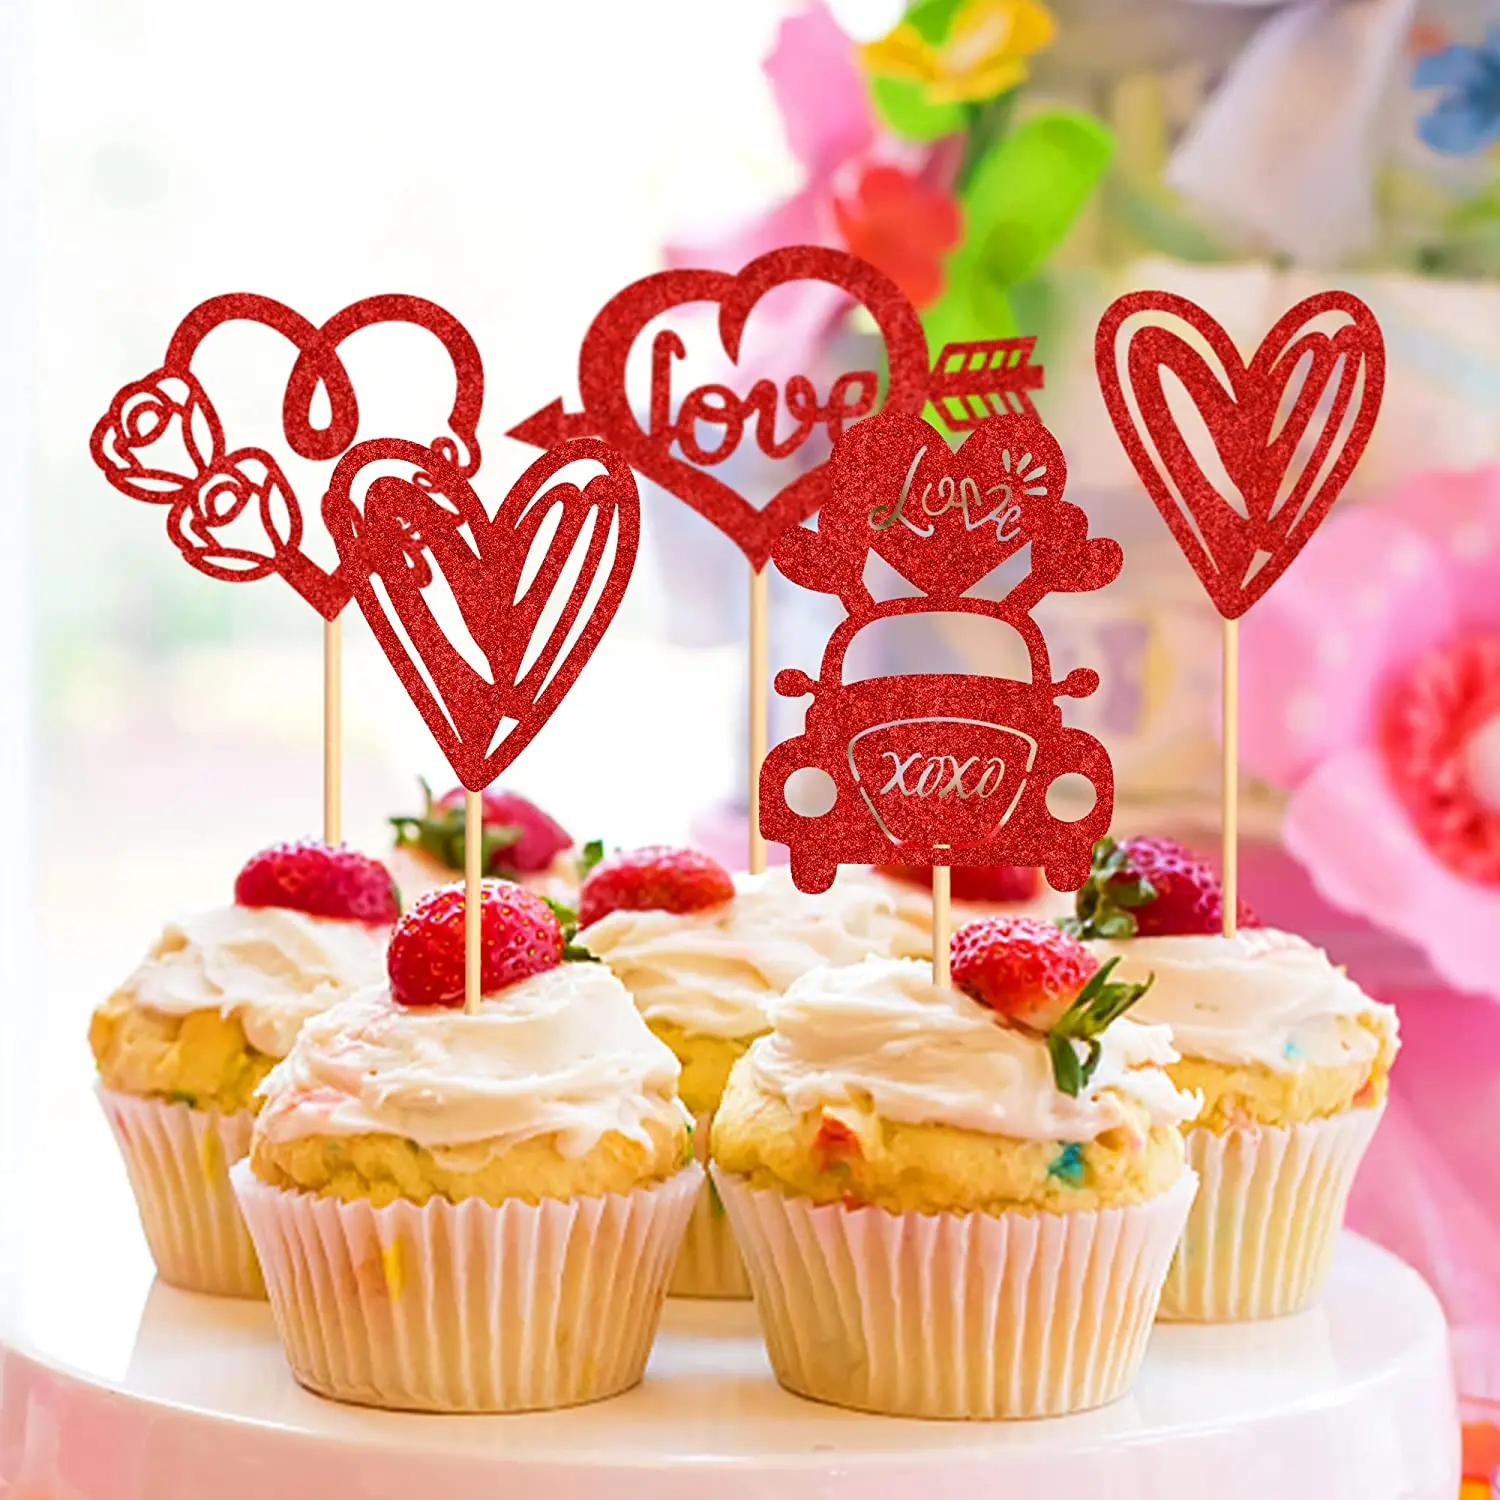 https://ae01.alicdn.com/kf/Scff1646656e5491e9f4c5e3be9aa230aH/24-Pack-Red-Glitter-Valentine-s-Day-Cupcake-Toppers-Love-Heart-Rose-Cupcake-Toppers-Wedding-Engagement.jpg